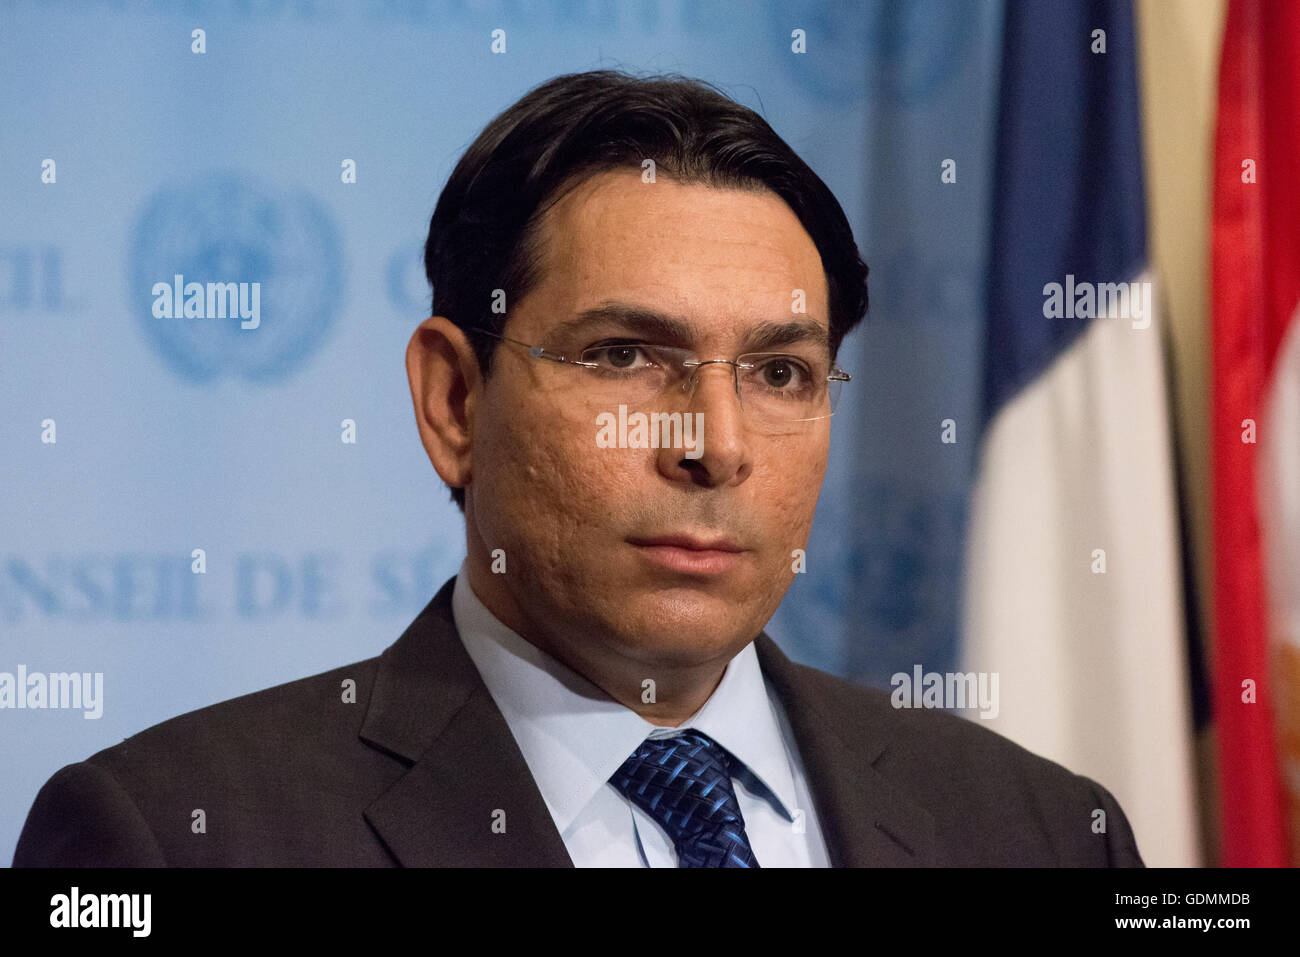 Permanent Representative of Israeli to the United Nations Ambassador Danny Danon speaks to the press at the Security Council stakekout. Before the start of a United Nations Security Council briefing on Iran's compliance with the Joint Comprehensive Plan of Action with regard to its nuclear activities (negotiated July 14, 2015 and implemented on January 16, 2016), Israeli Ambassador to the UN Danny Danon spoke to the press outside the Security Council chamber, reaffirming Israel's contention that Iran remains a key international threat, at UN Headquarters in New York City. (Photo by Albin Lohr- Stock Photo